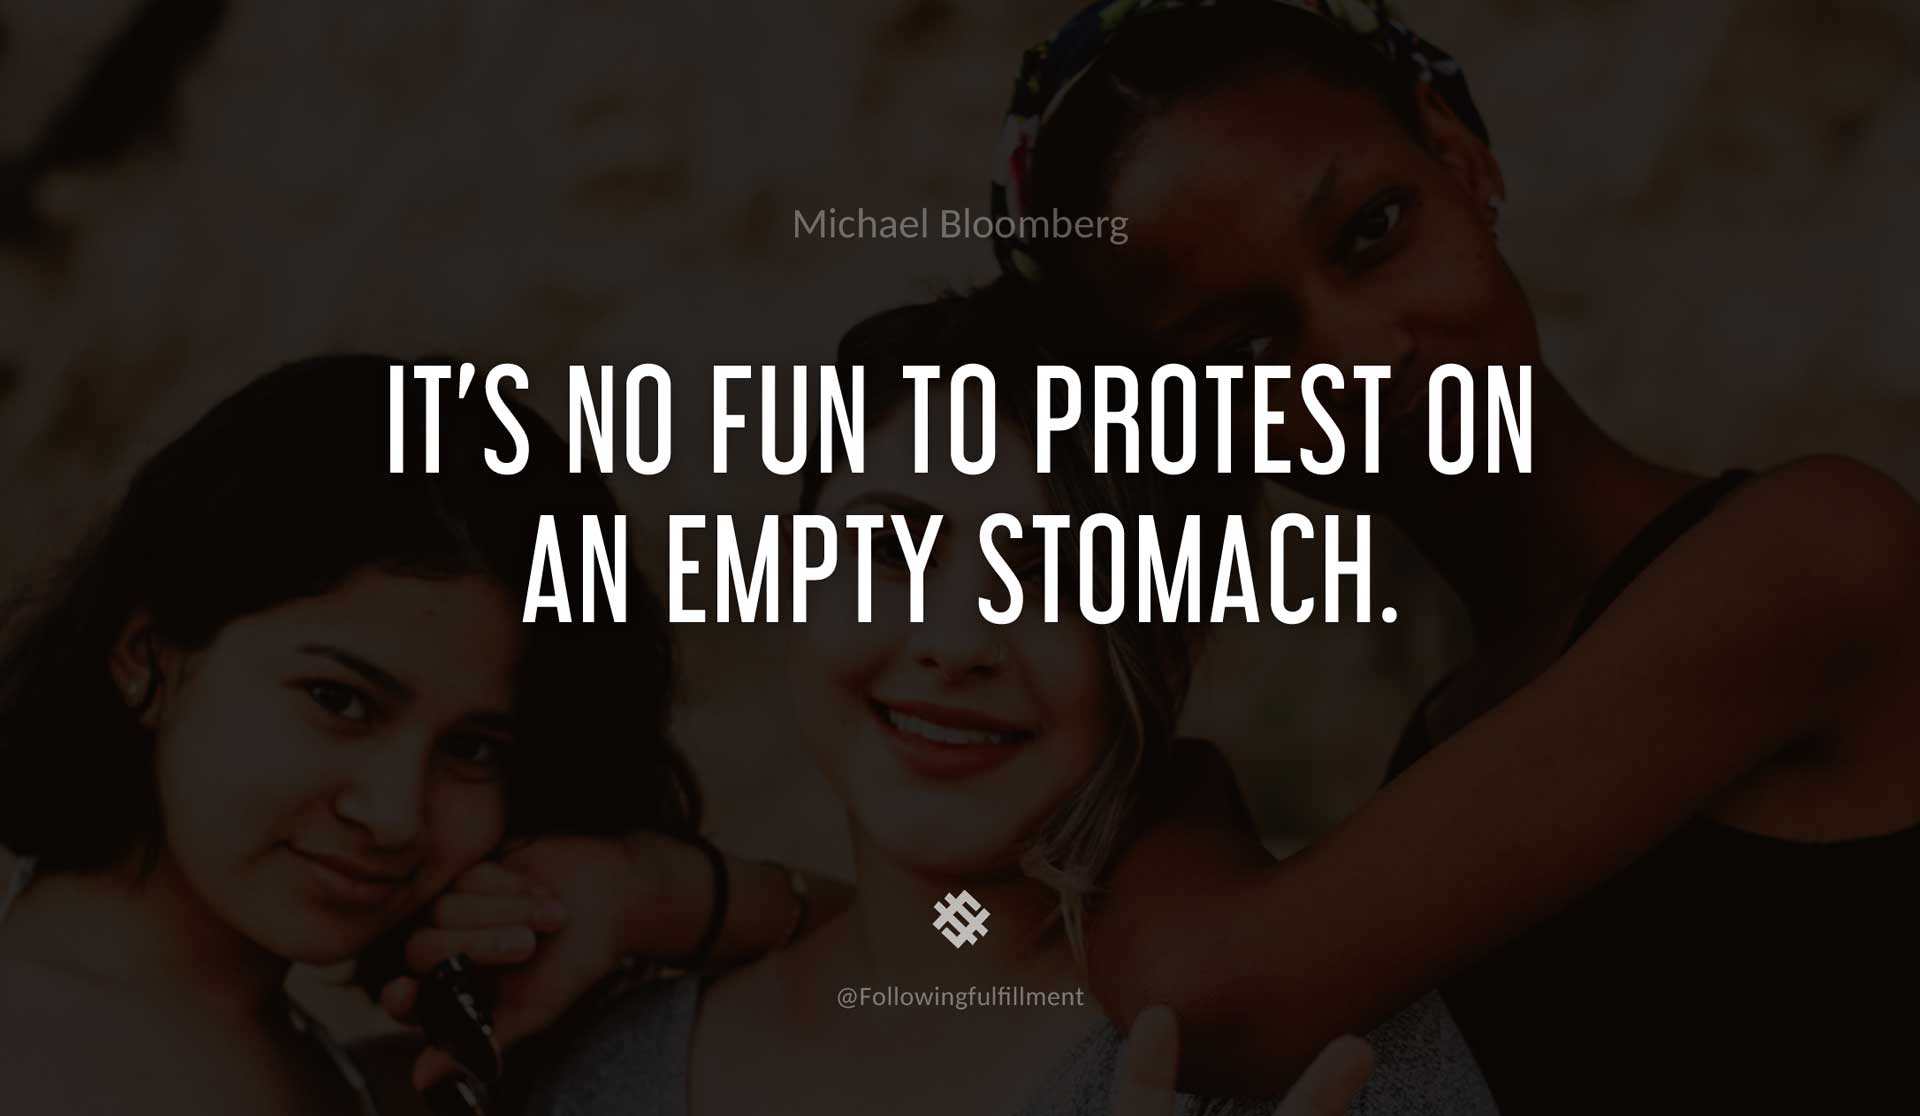 It's-no-fun-to-protest-on-an-empty-stomach.-MICHAEL-BLOOMBERG-Quote.jpg